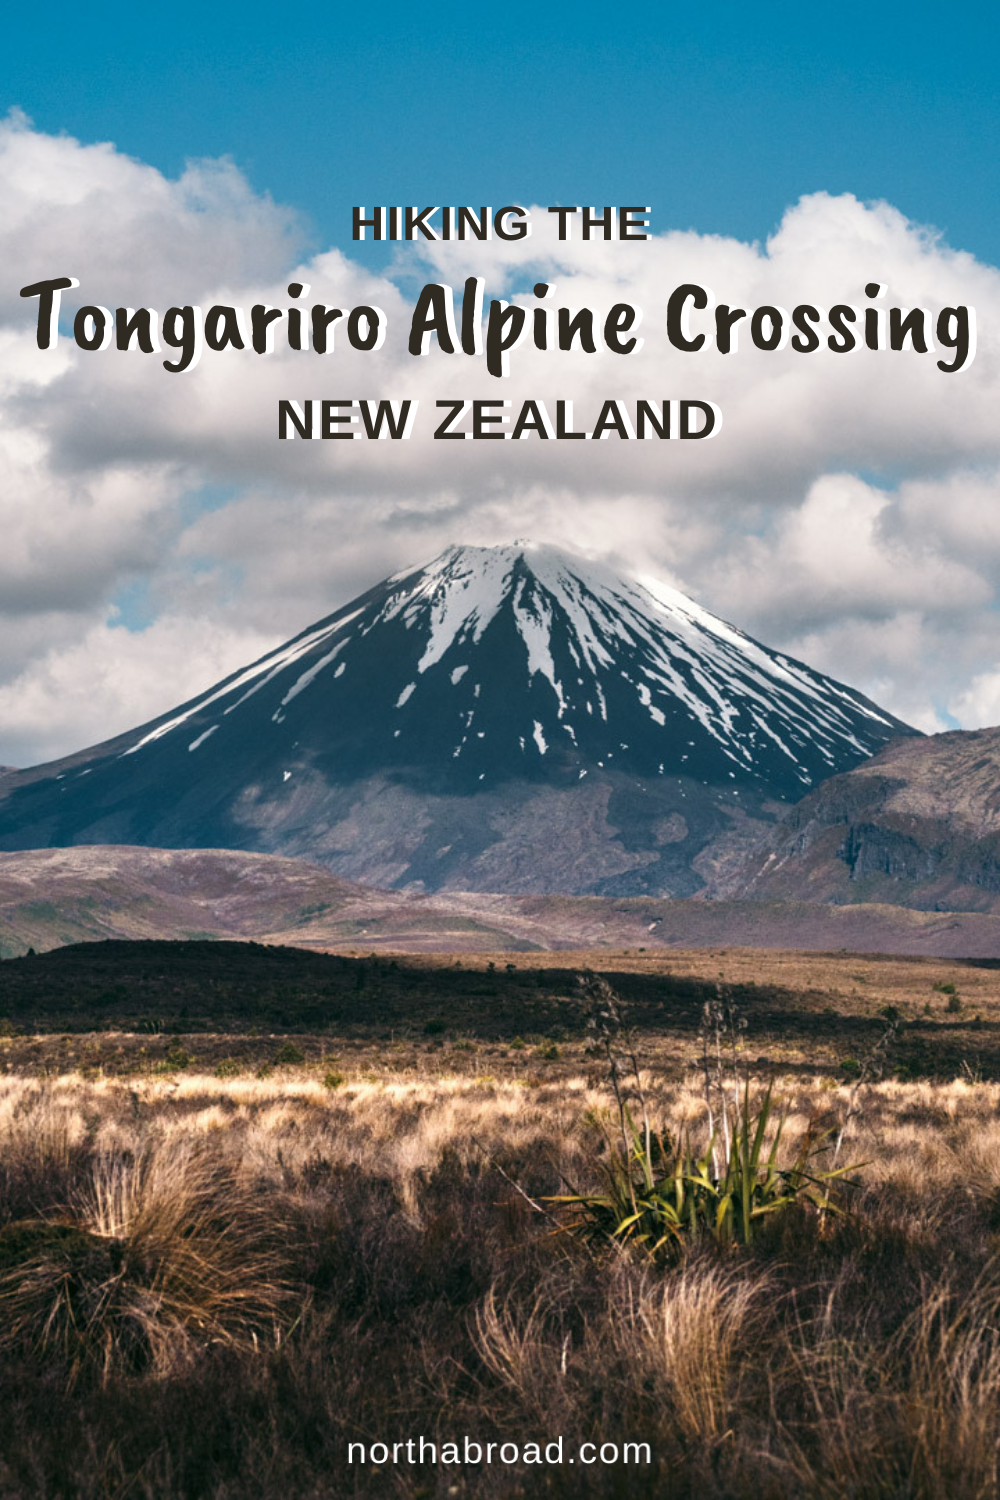 Our Experience Hiking the Tongariro Alpine Crossing in New Zealand